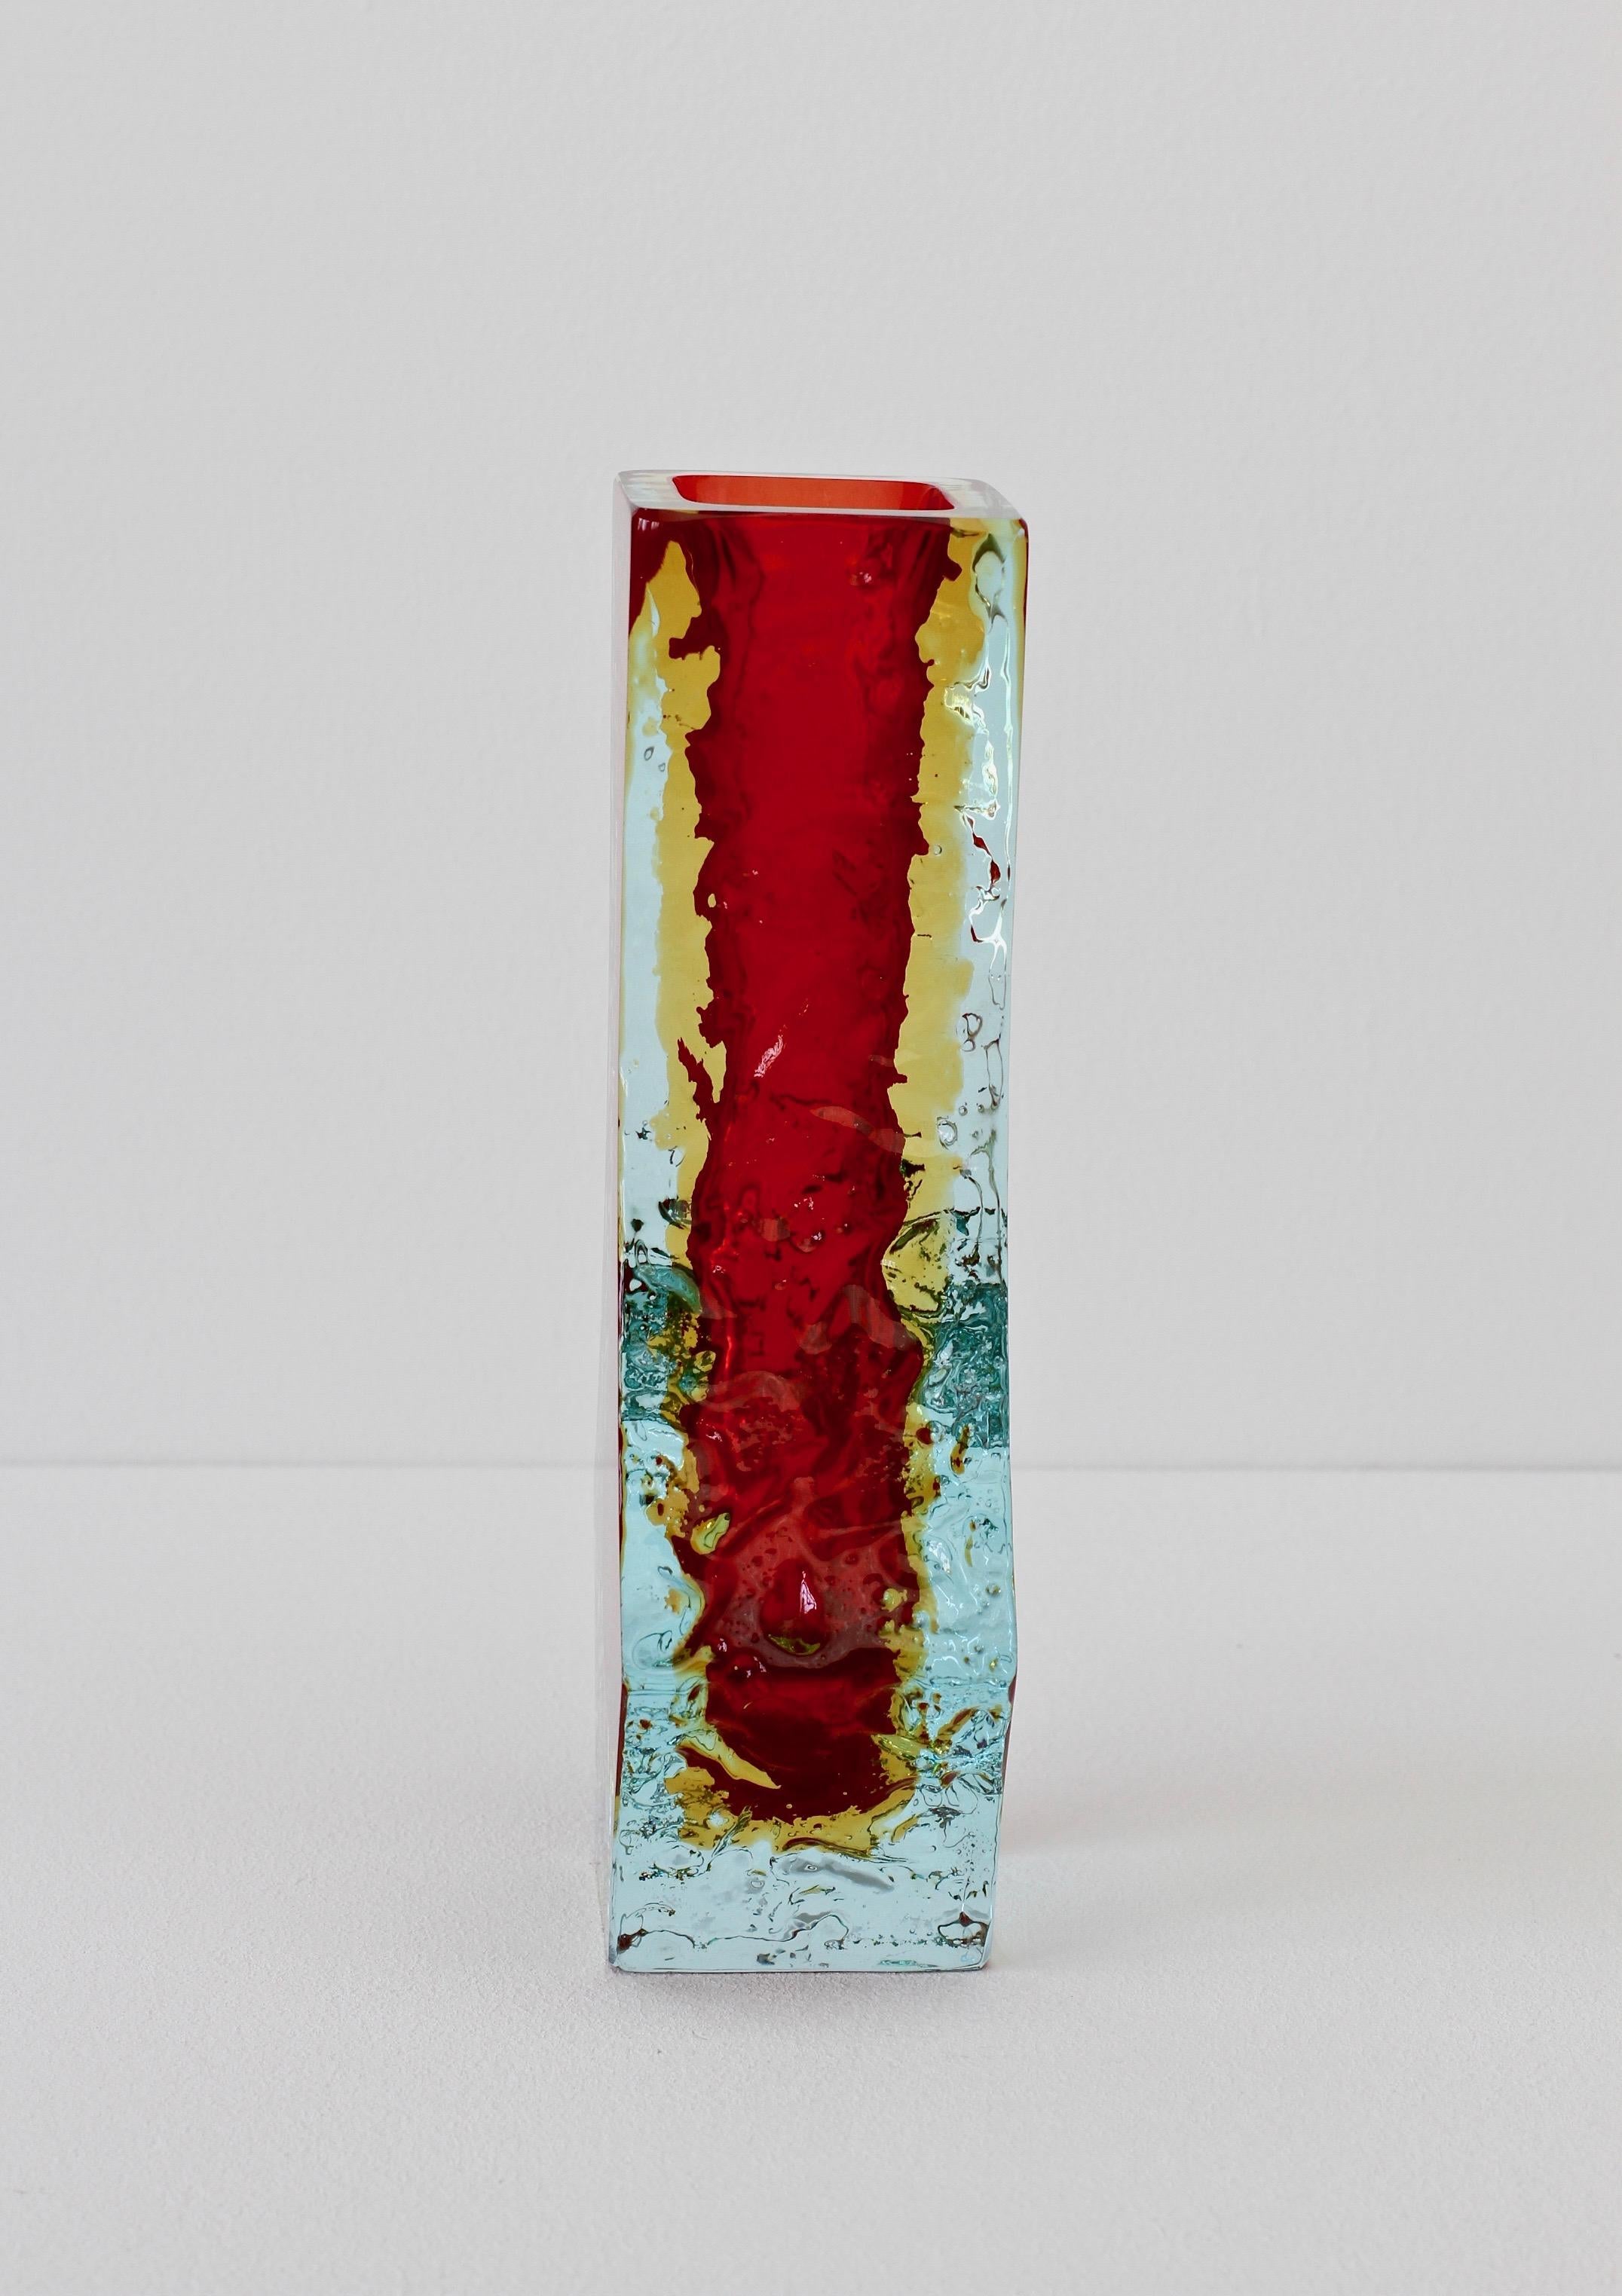 20th Century Italian Textured Faceted Murano 'Sommerso' Glass Vase Attributed to Mandruzzato